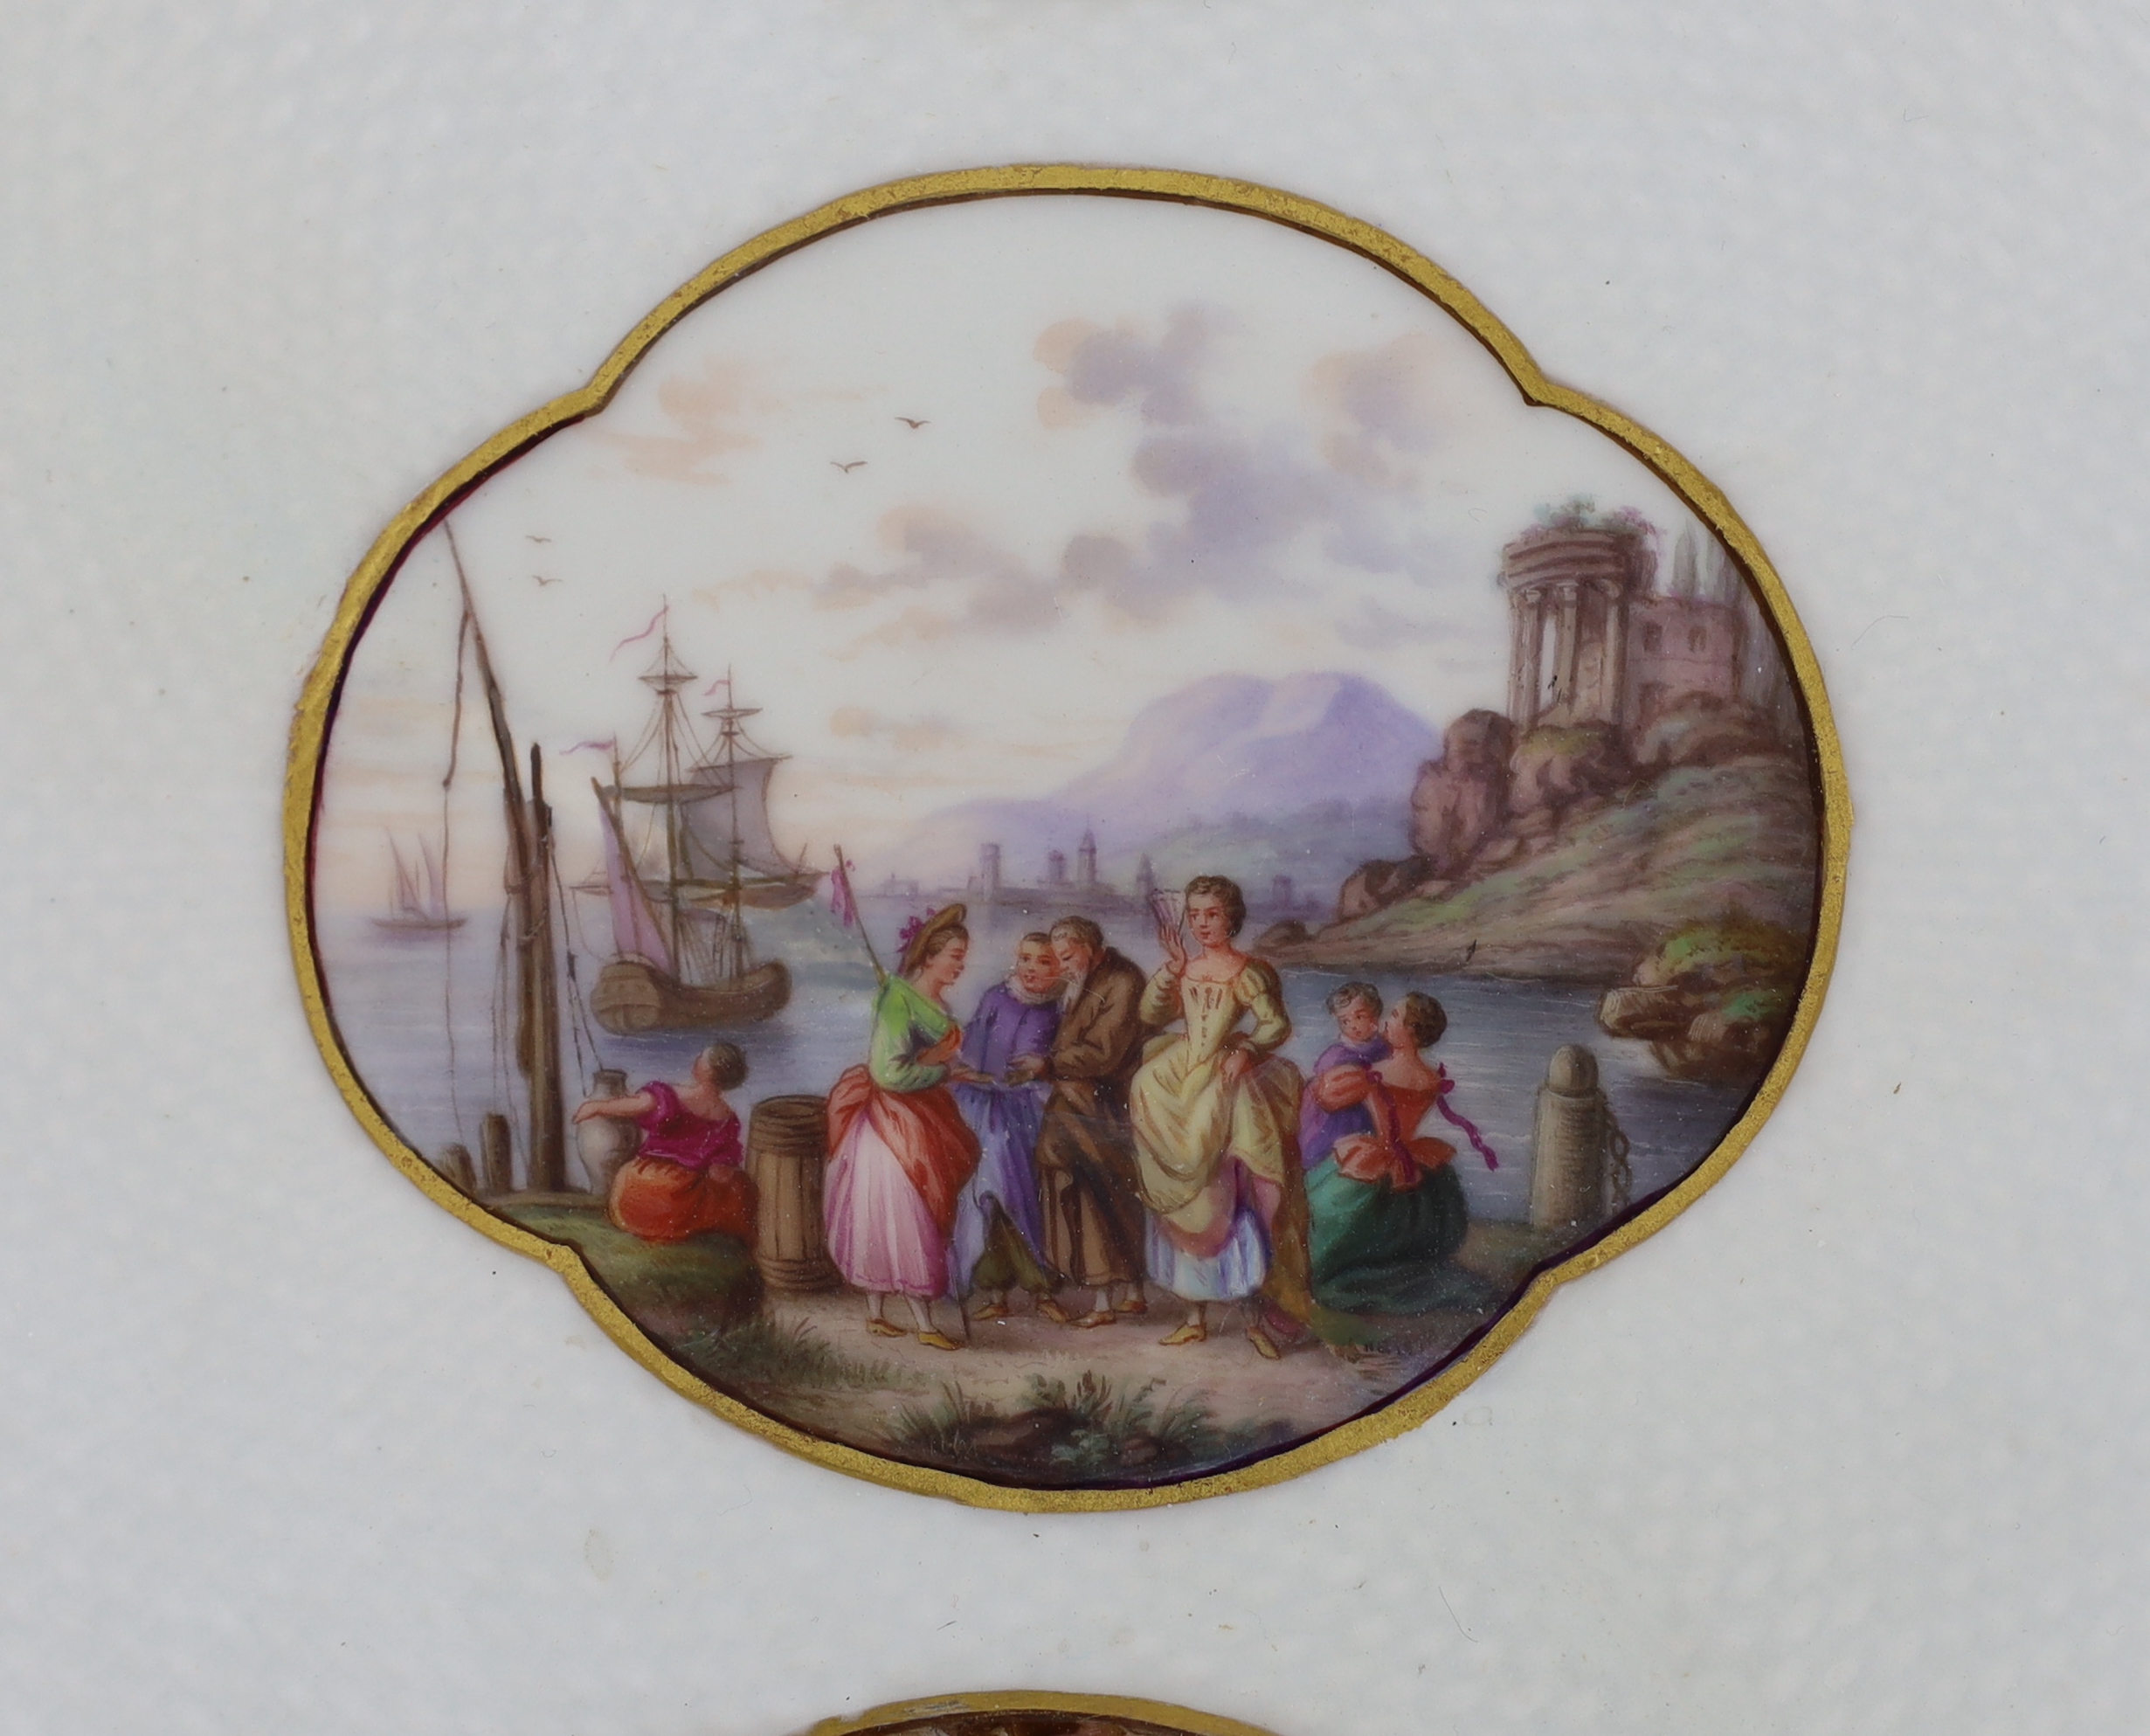 A Meissen porcelain lozenge shaped tray, 19th century, broken and restored